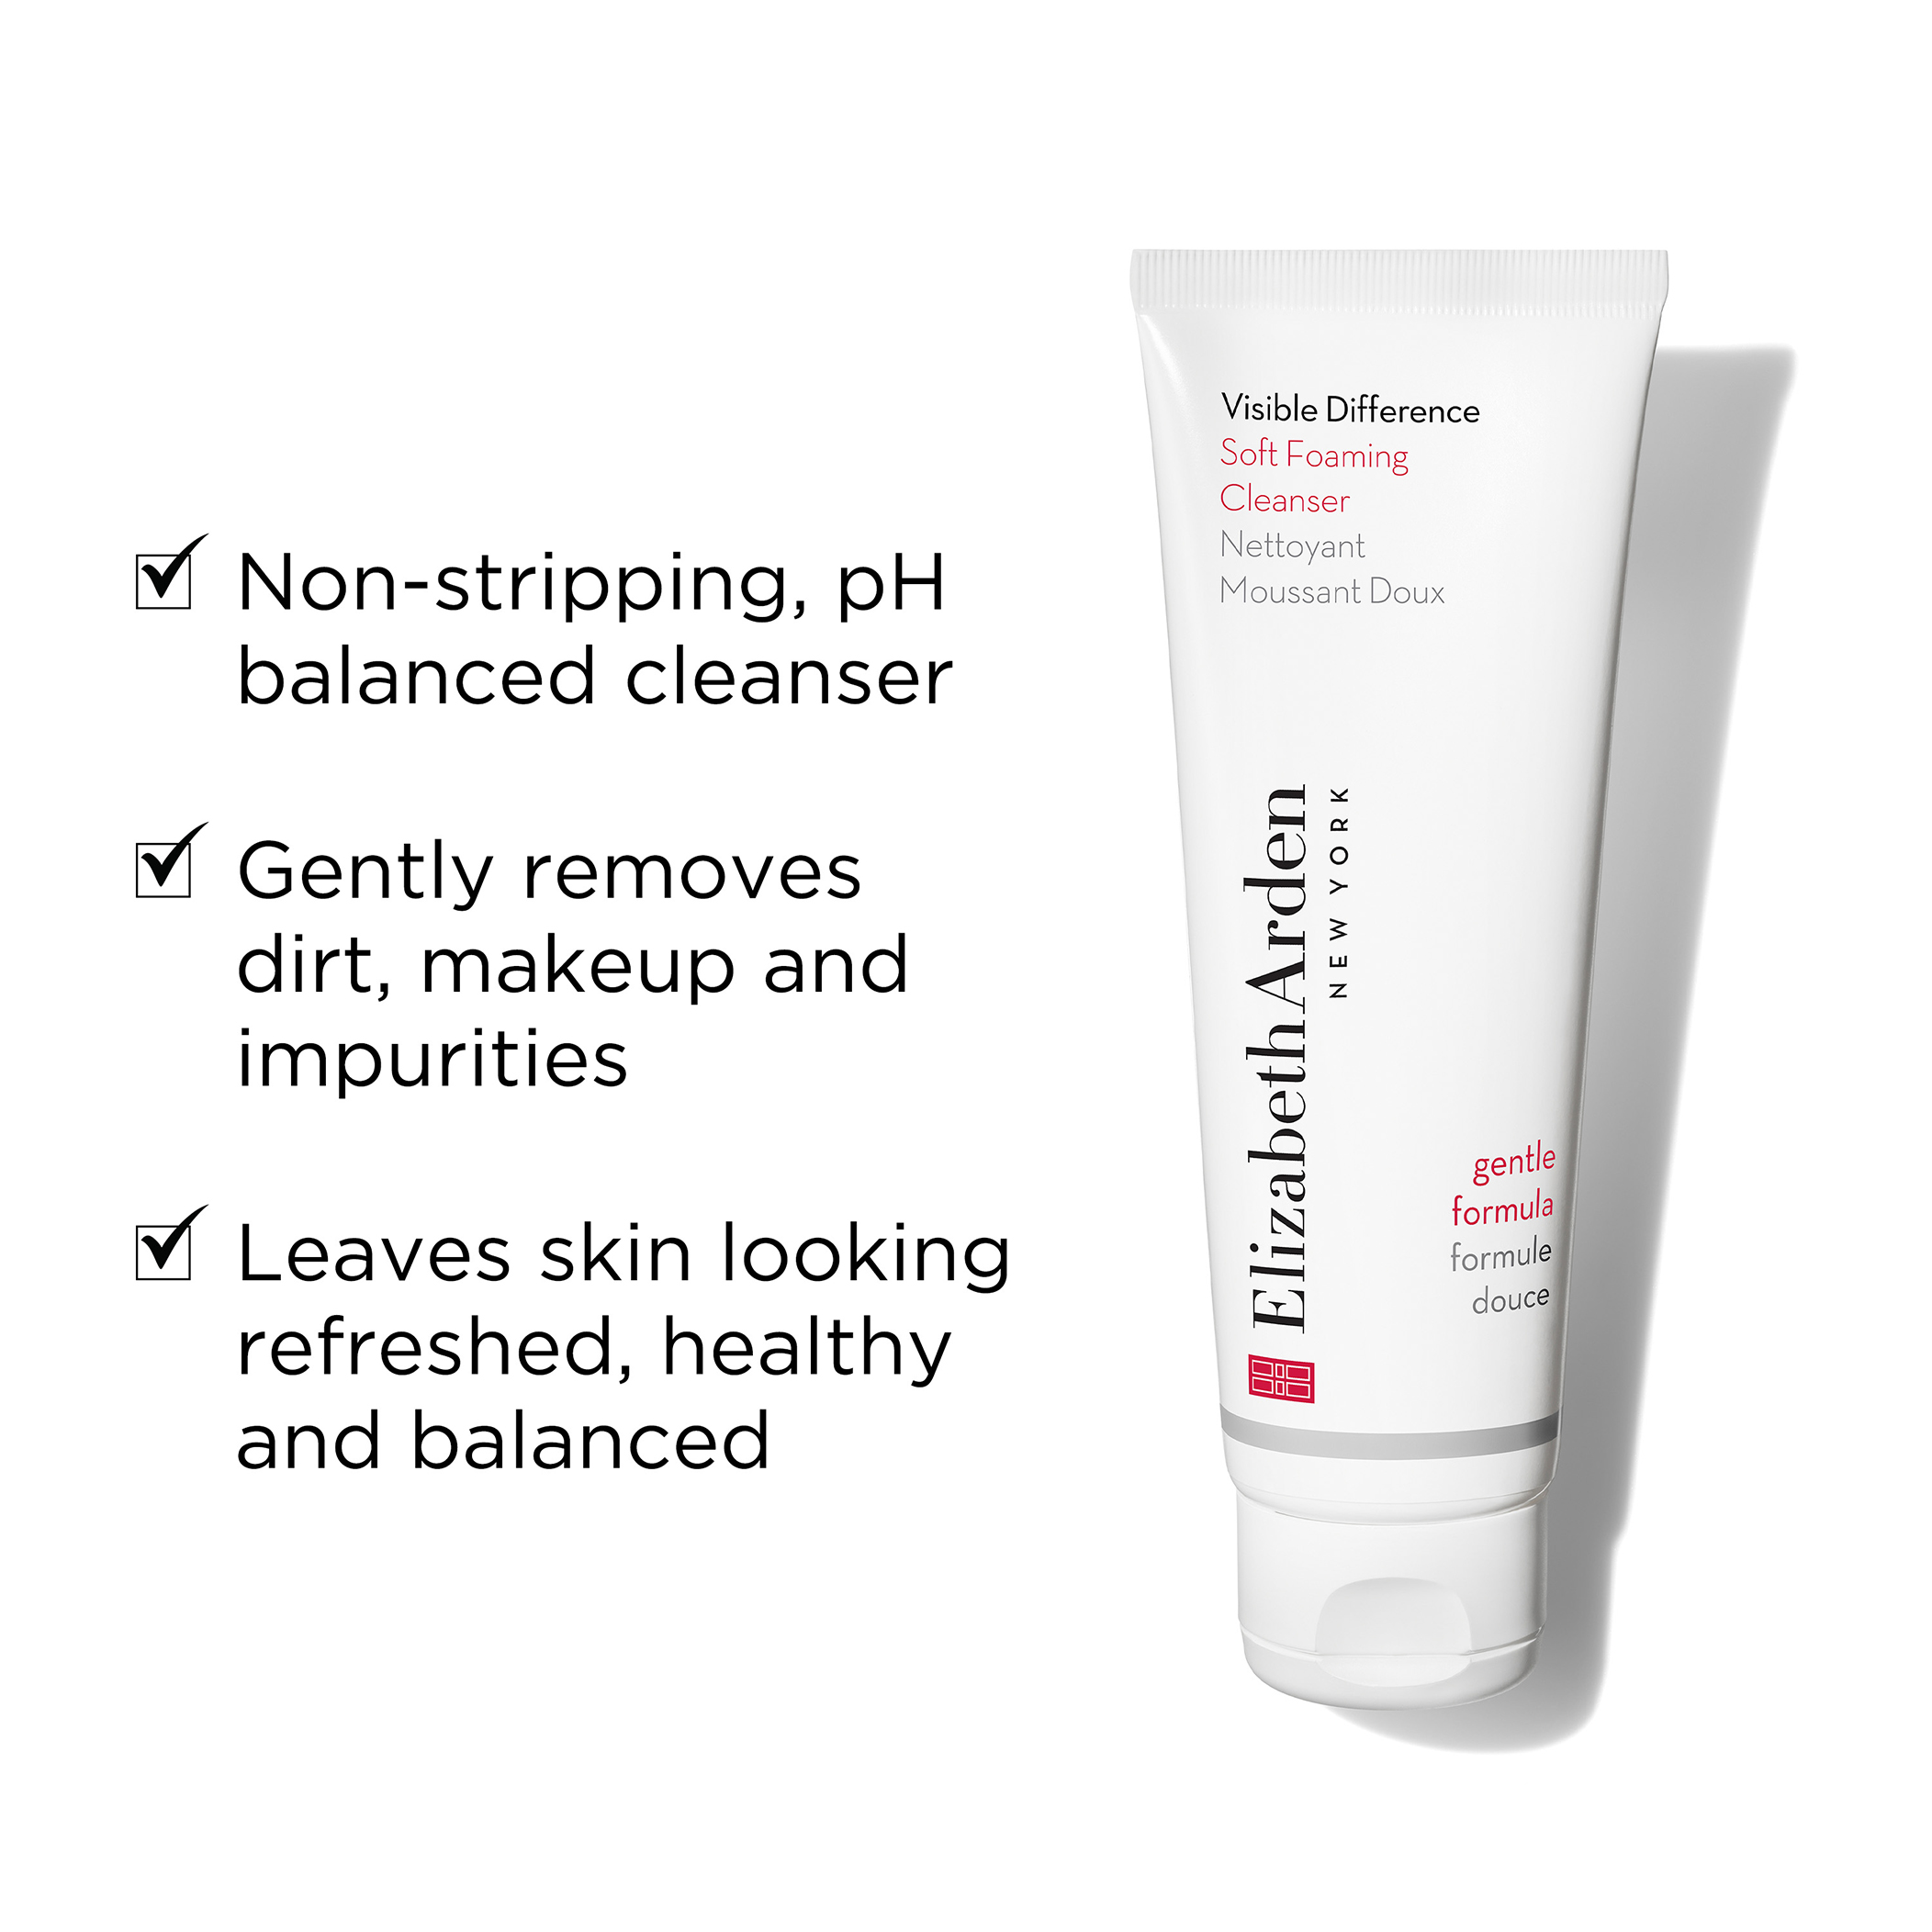 Benefits: Non-stripping, pH balanced cleanser, Gently removes dirt, makeup and impurities, Leaves skin looking refreshed, healthy and balanced